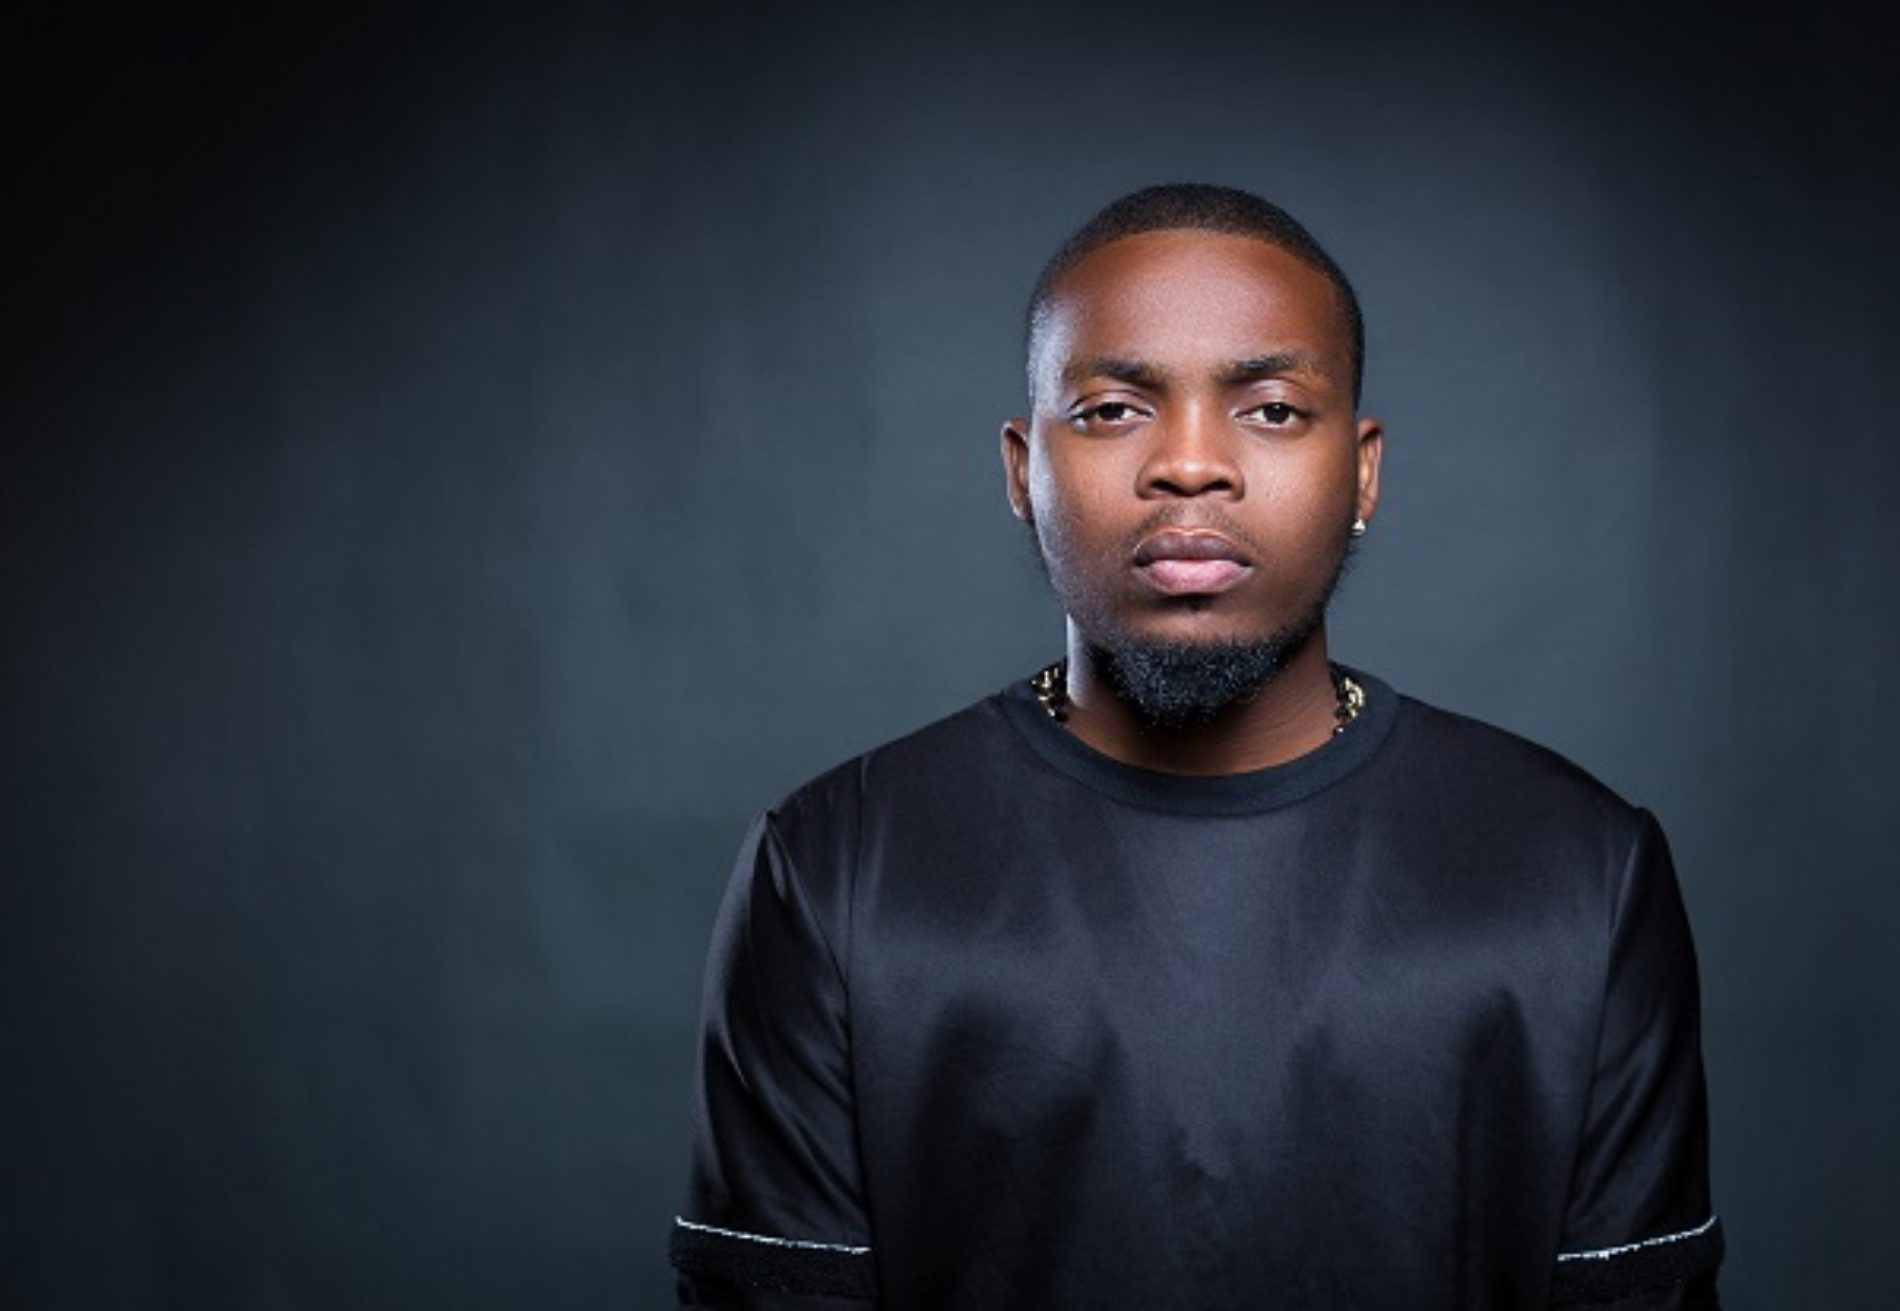 Americans call Olamide gay for wearing sandals